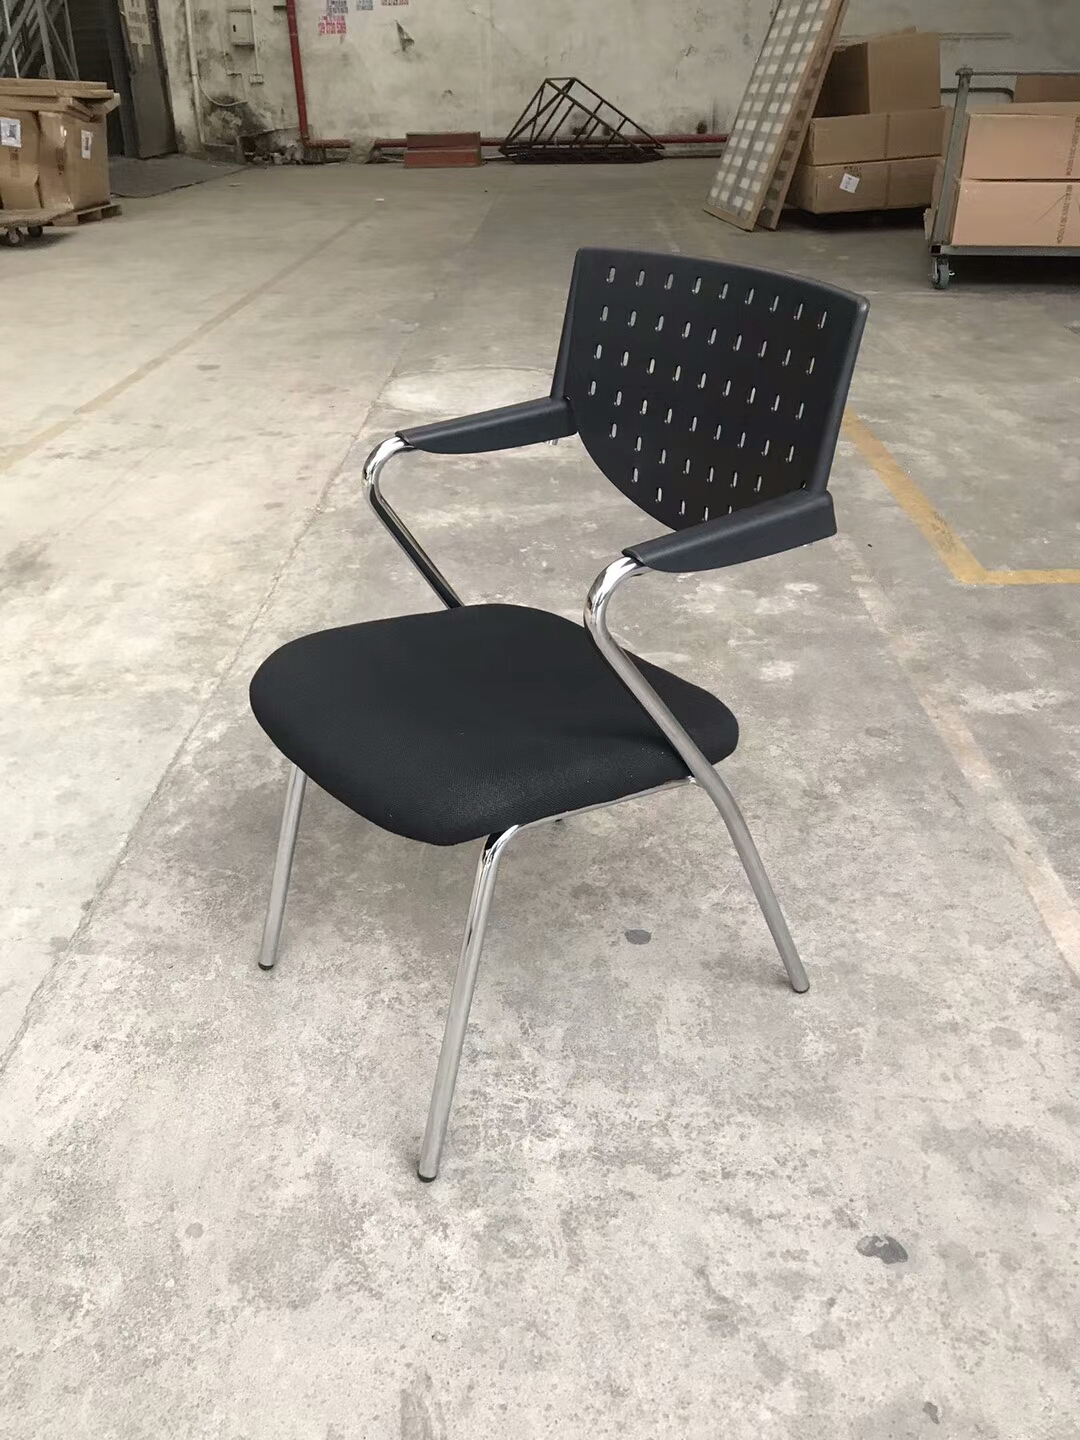 Students Chair For Sale In Accra,Ghana